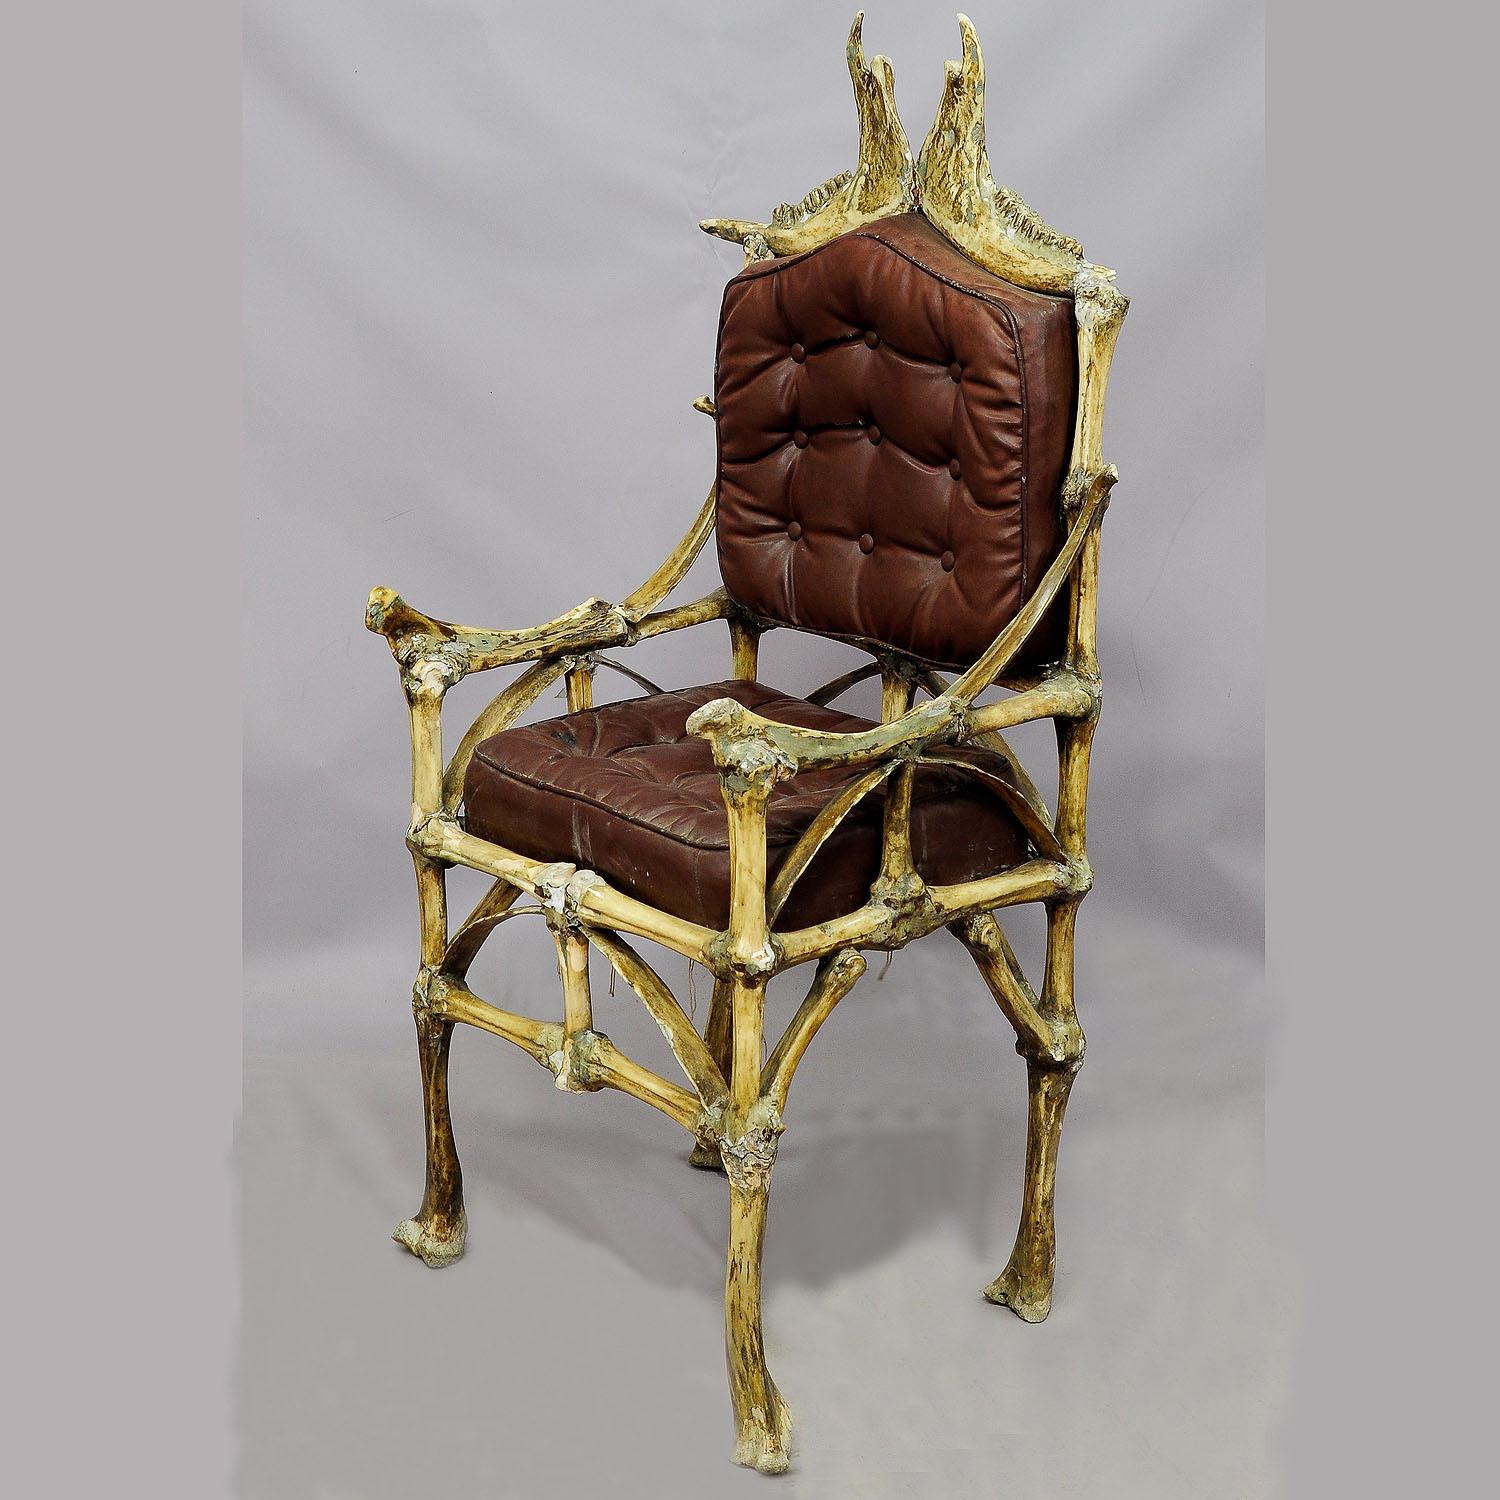 A great piece of fantasy furniture - a large throne chair made of original bones from the male cattle (Bos taurus). All parts are made of real ox bones sticked together with iron rods. On top of the backrest are underjaw bones. The chair is